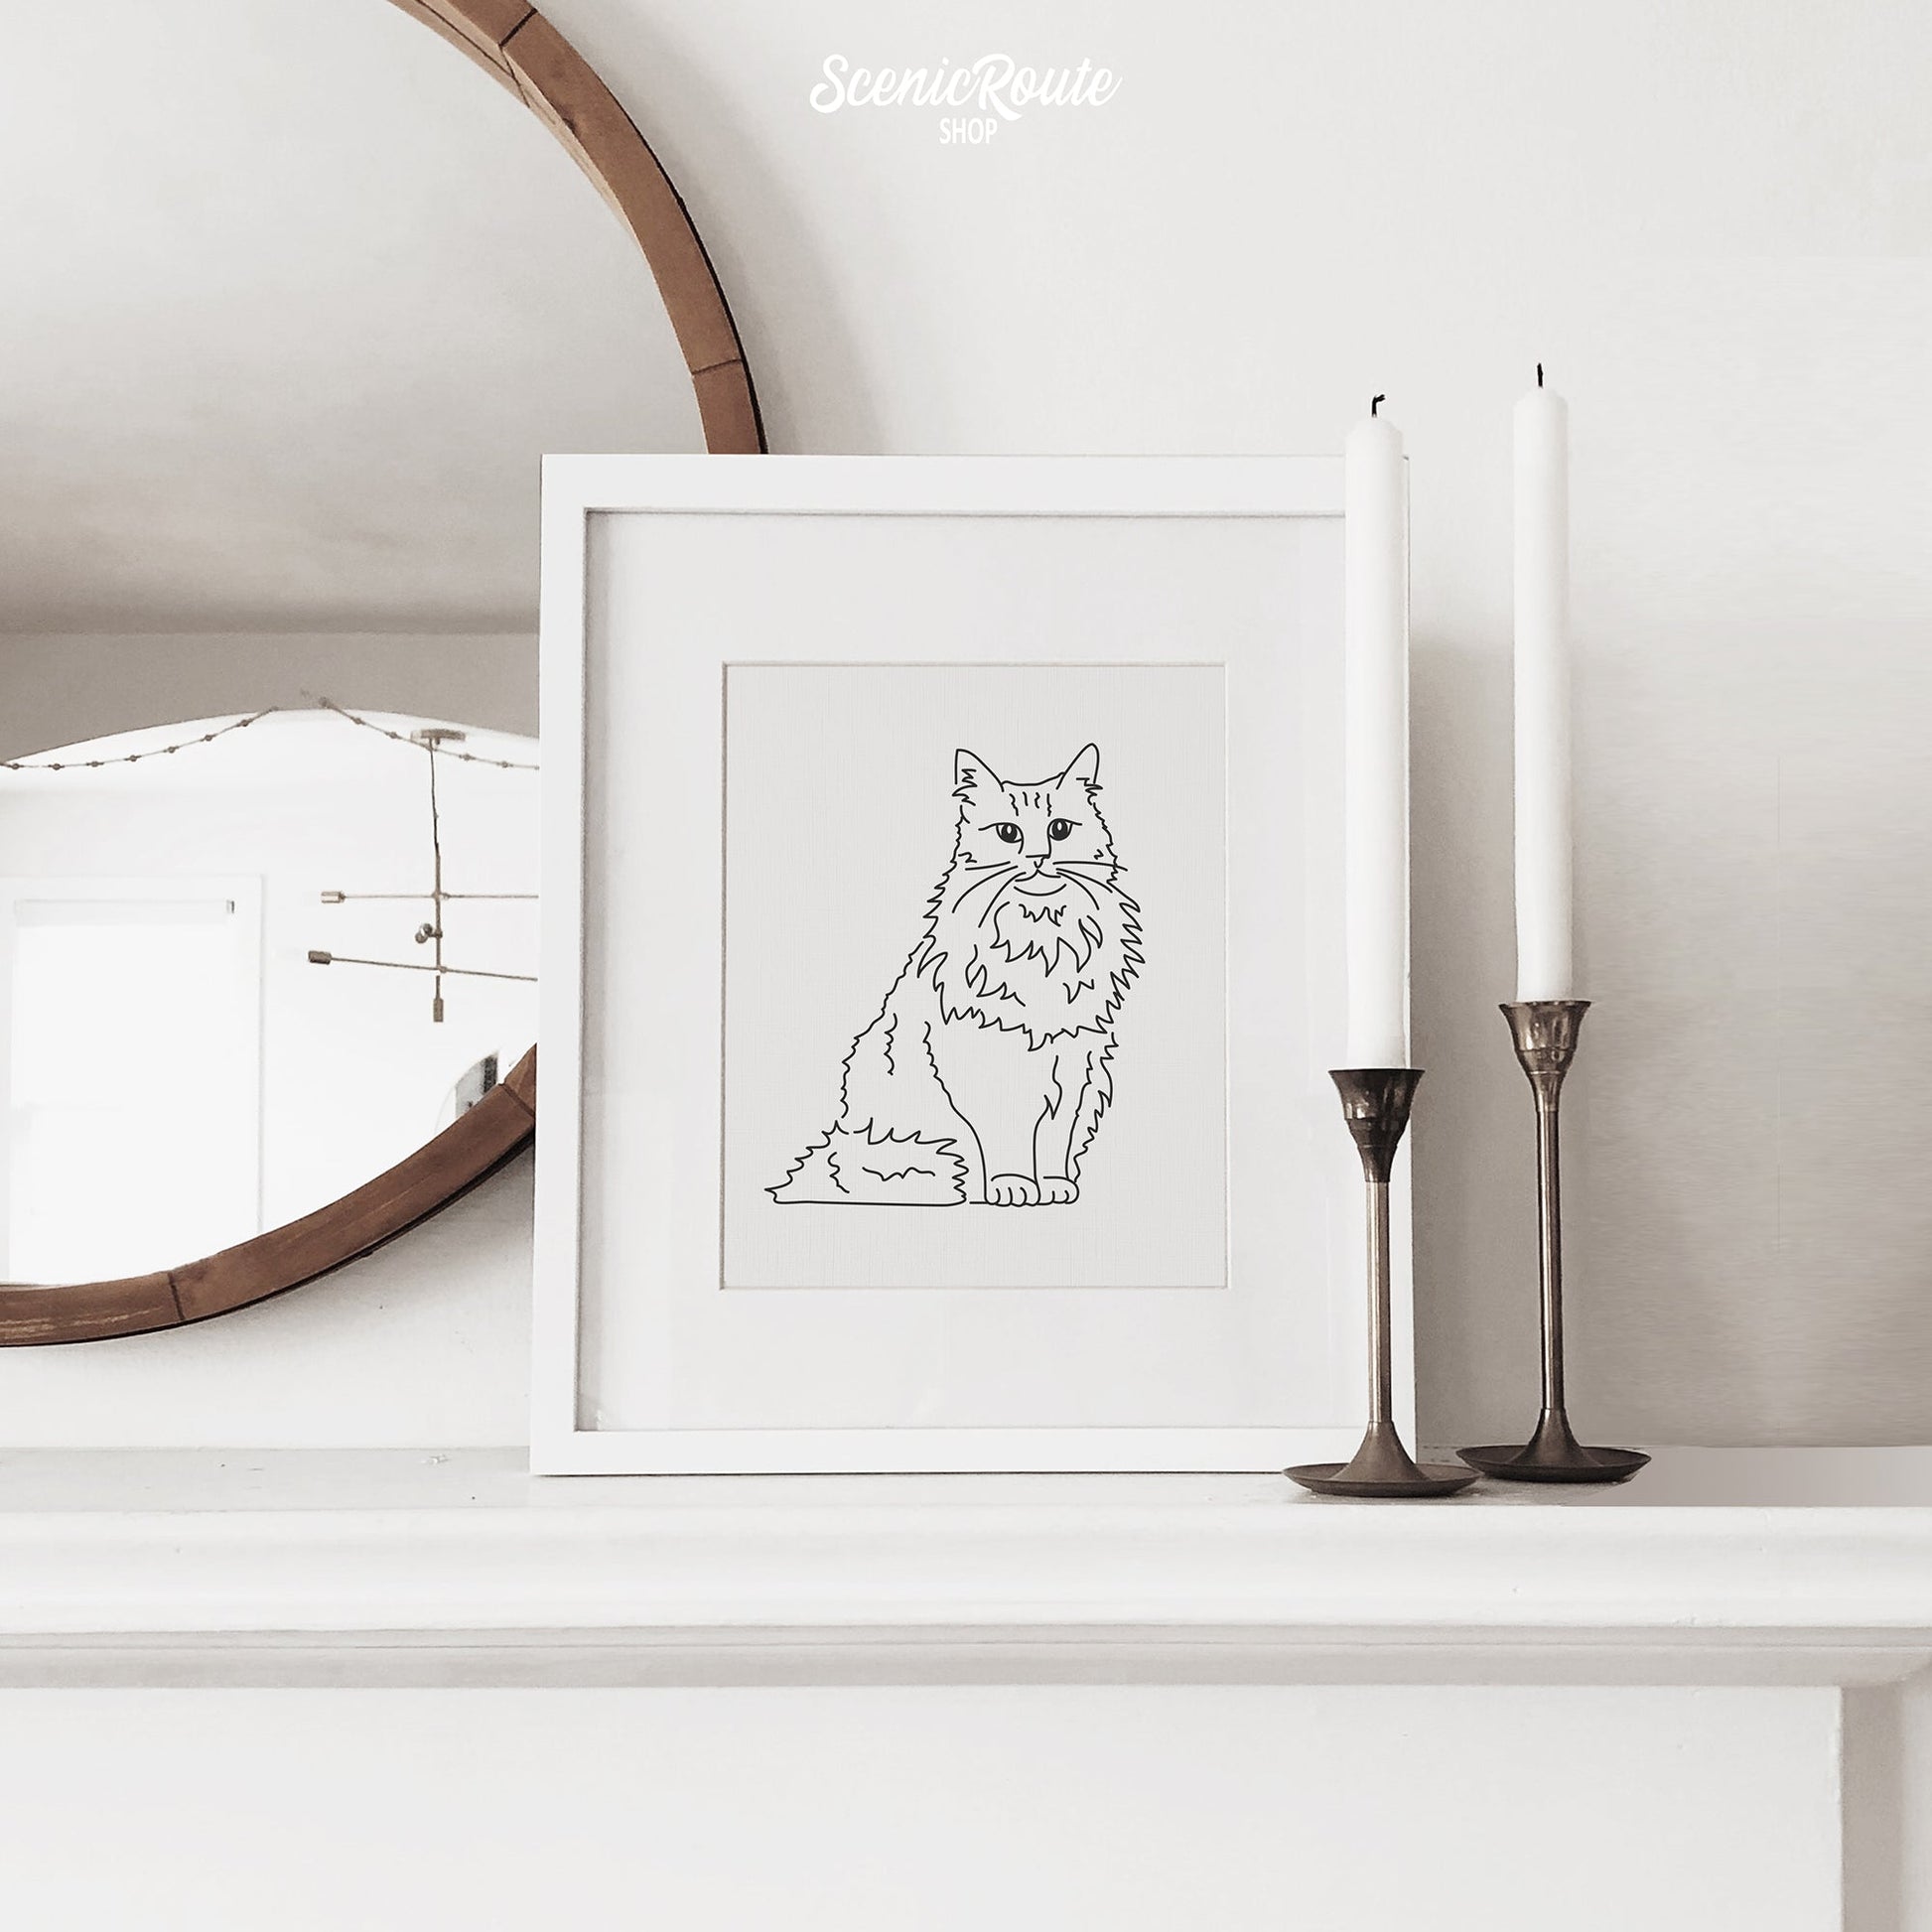 A framed line art drawing of a Norwegian Forest cat on a mangle with candles and a mirror